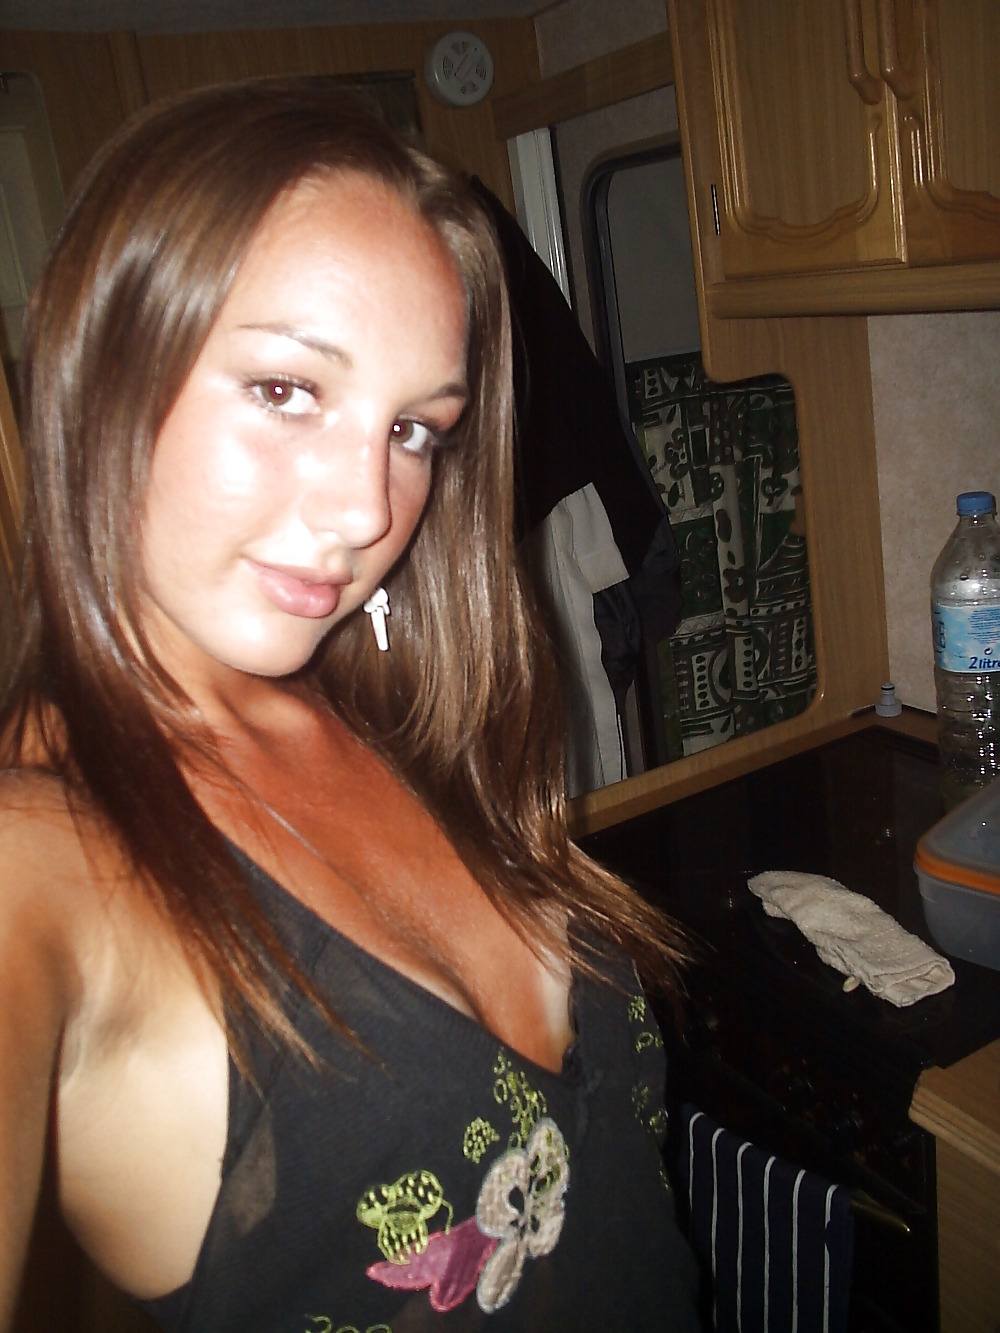 Gallery 34 adult photos